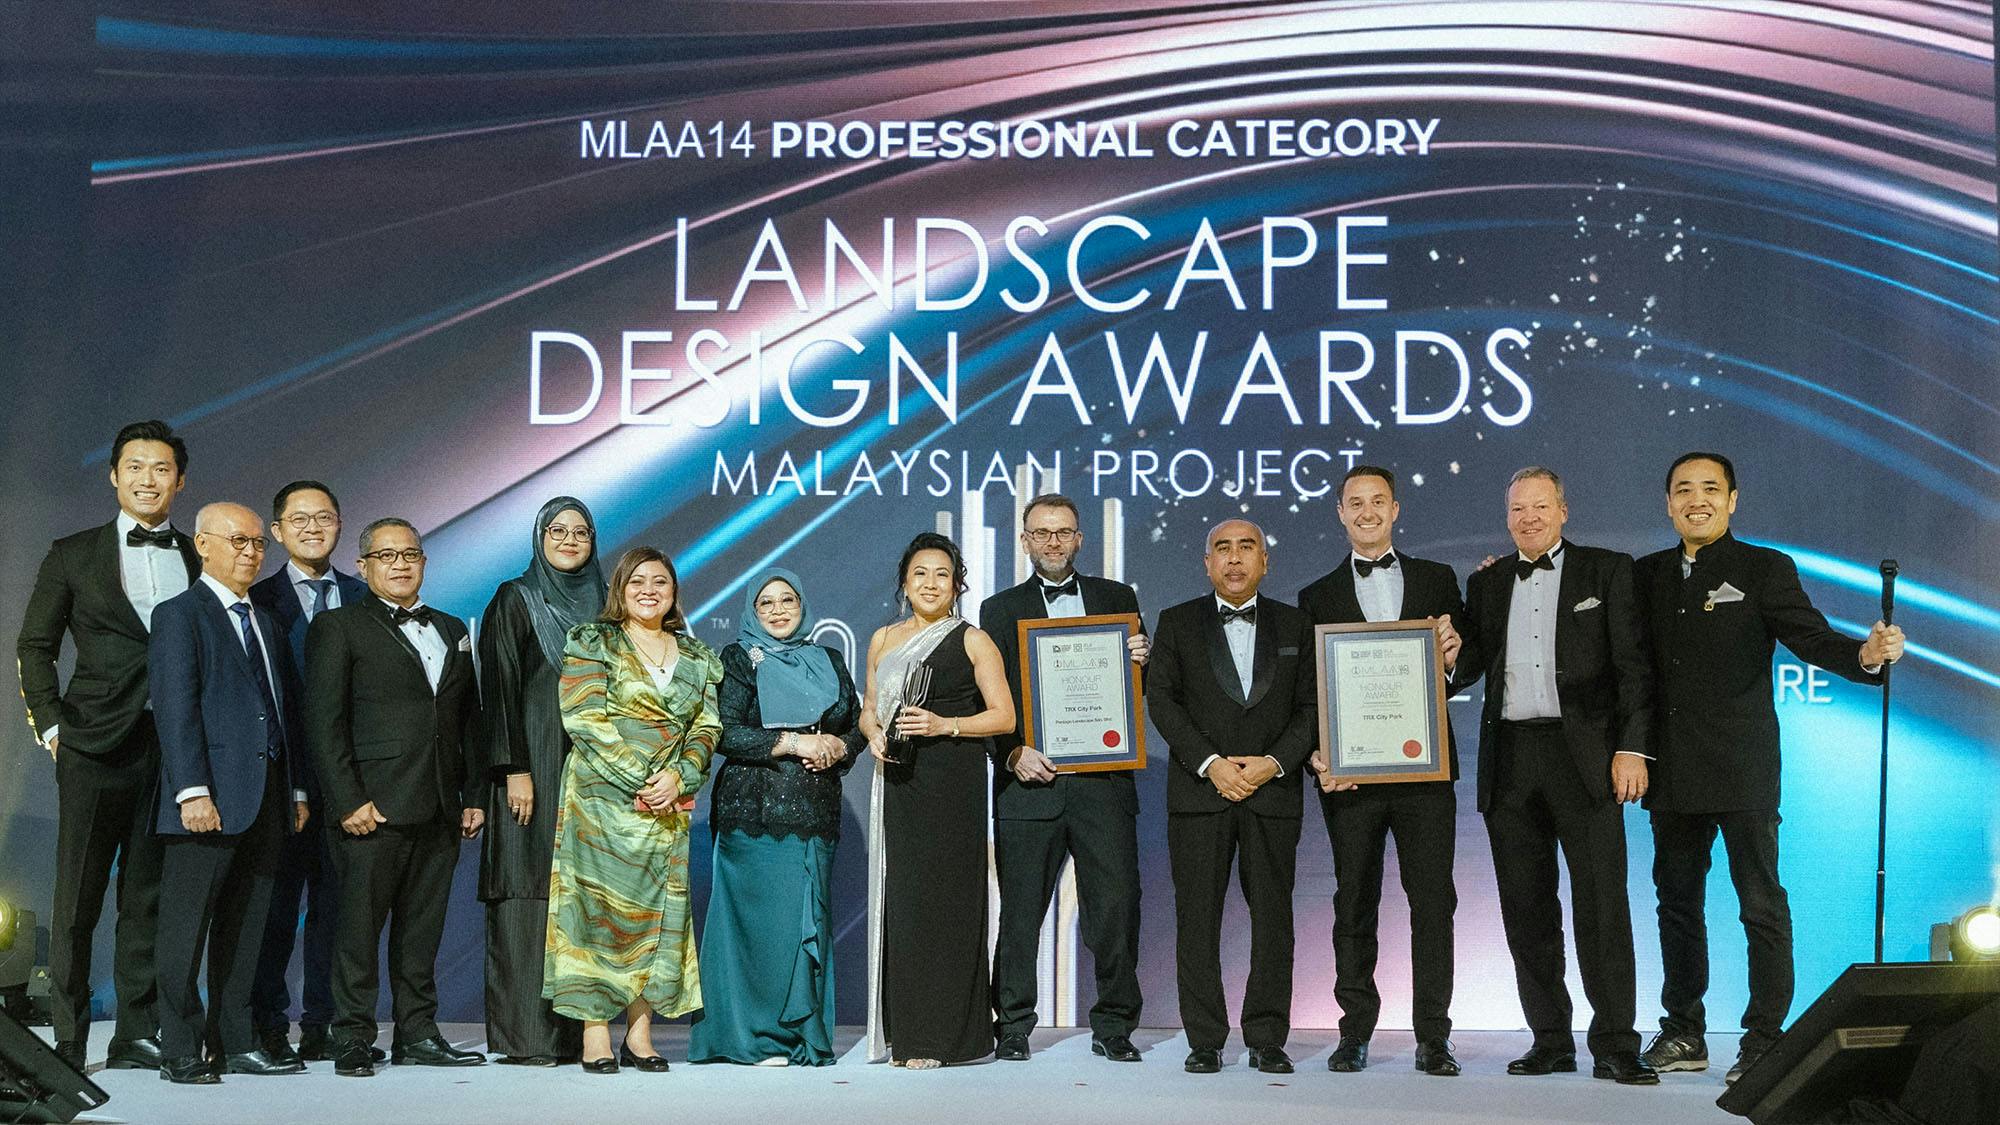 A photo of thirteen smiling people on stage receiving a "Landscape Design Award" according to the screen behind them.